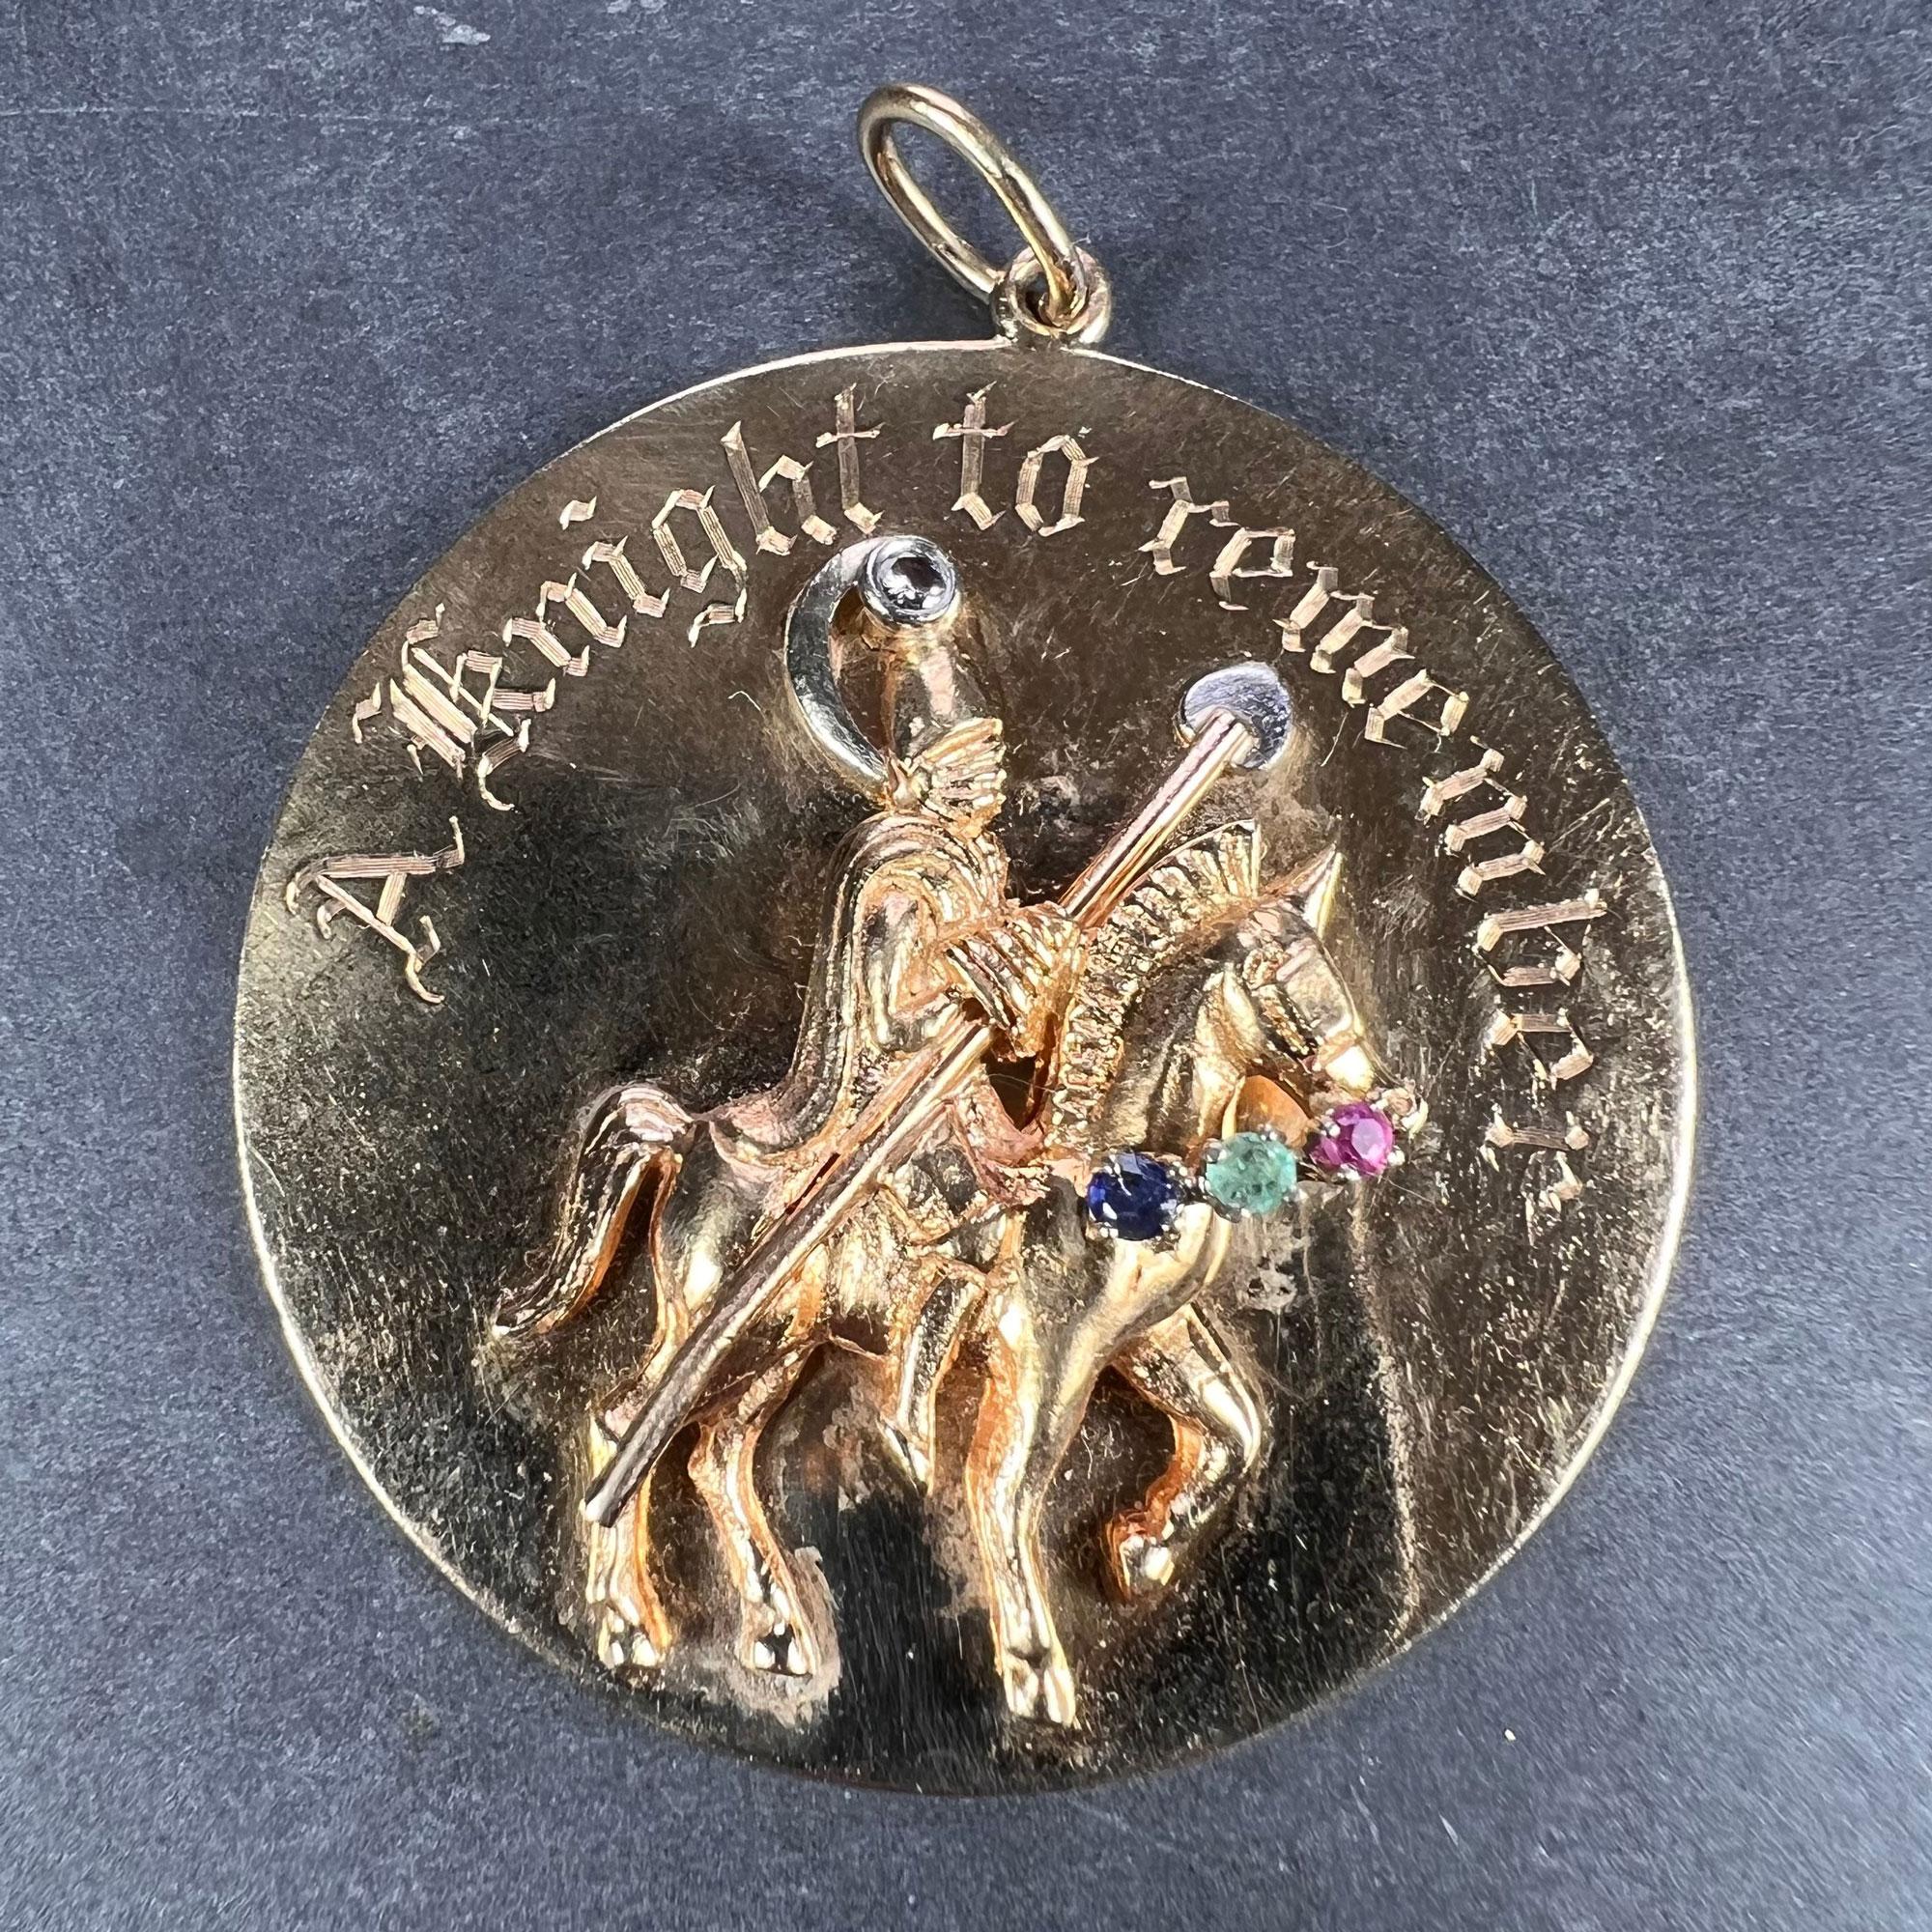 A very large 14 karat yellow gold charm pendant designed as a gem set round medallion depicting a knight on horseback in relief, engraved 'A Knight To Remember'. The knight carries a spear with white gold heart shaped tip, and has a white diamond